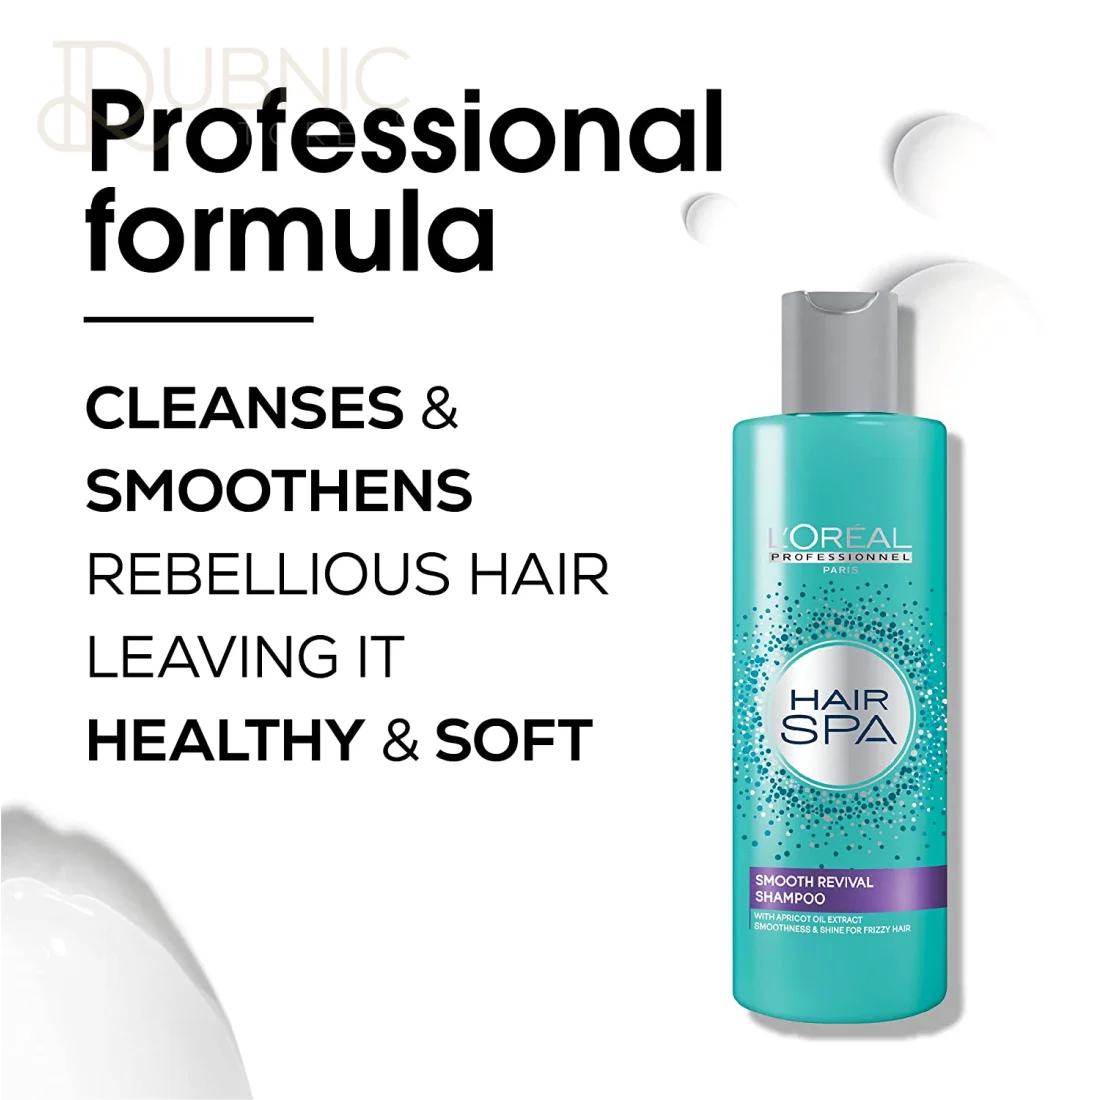 Loreal Professional Hair Spa Smooth Revival Conditioner 200 ml  Buy Loreal Professional  Hair Spa Smooth Revival Conditioner 200 ml Online at Best Price in India   Planet Health